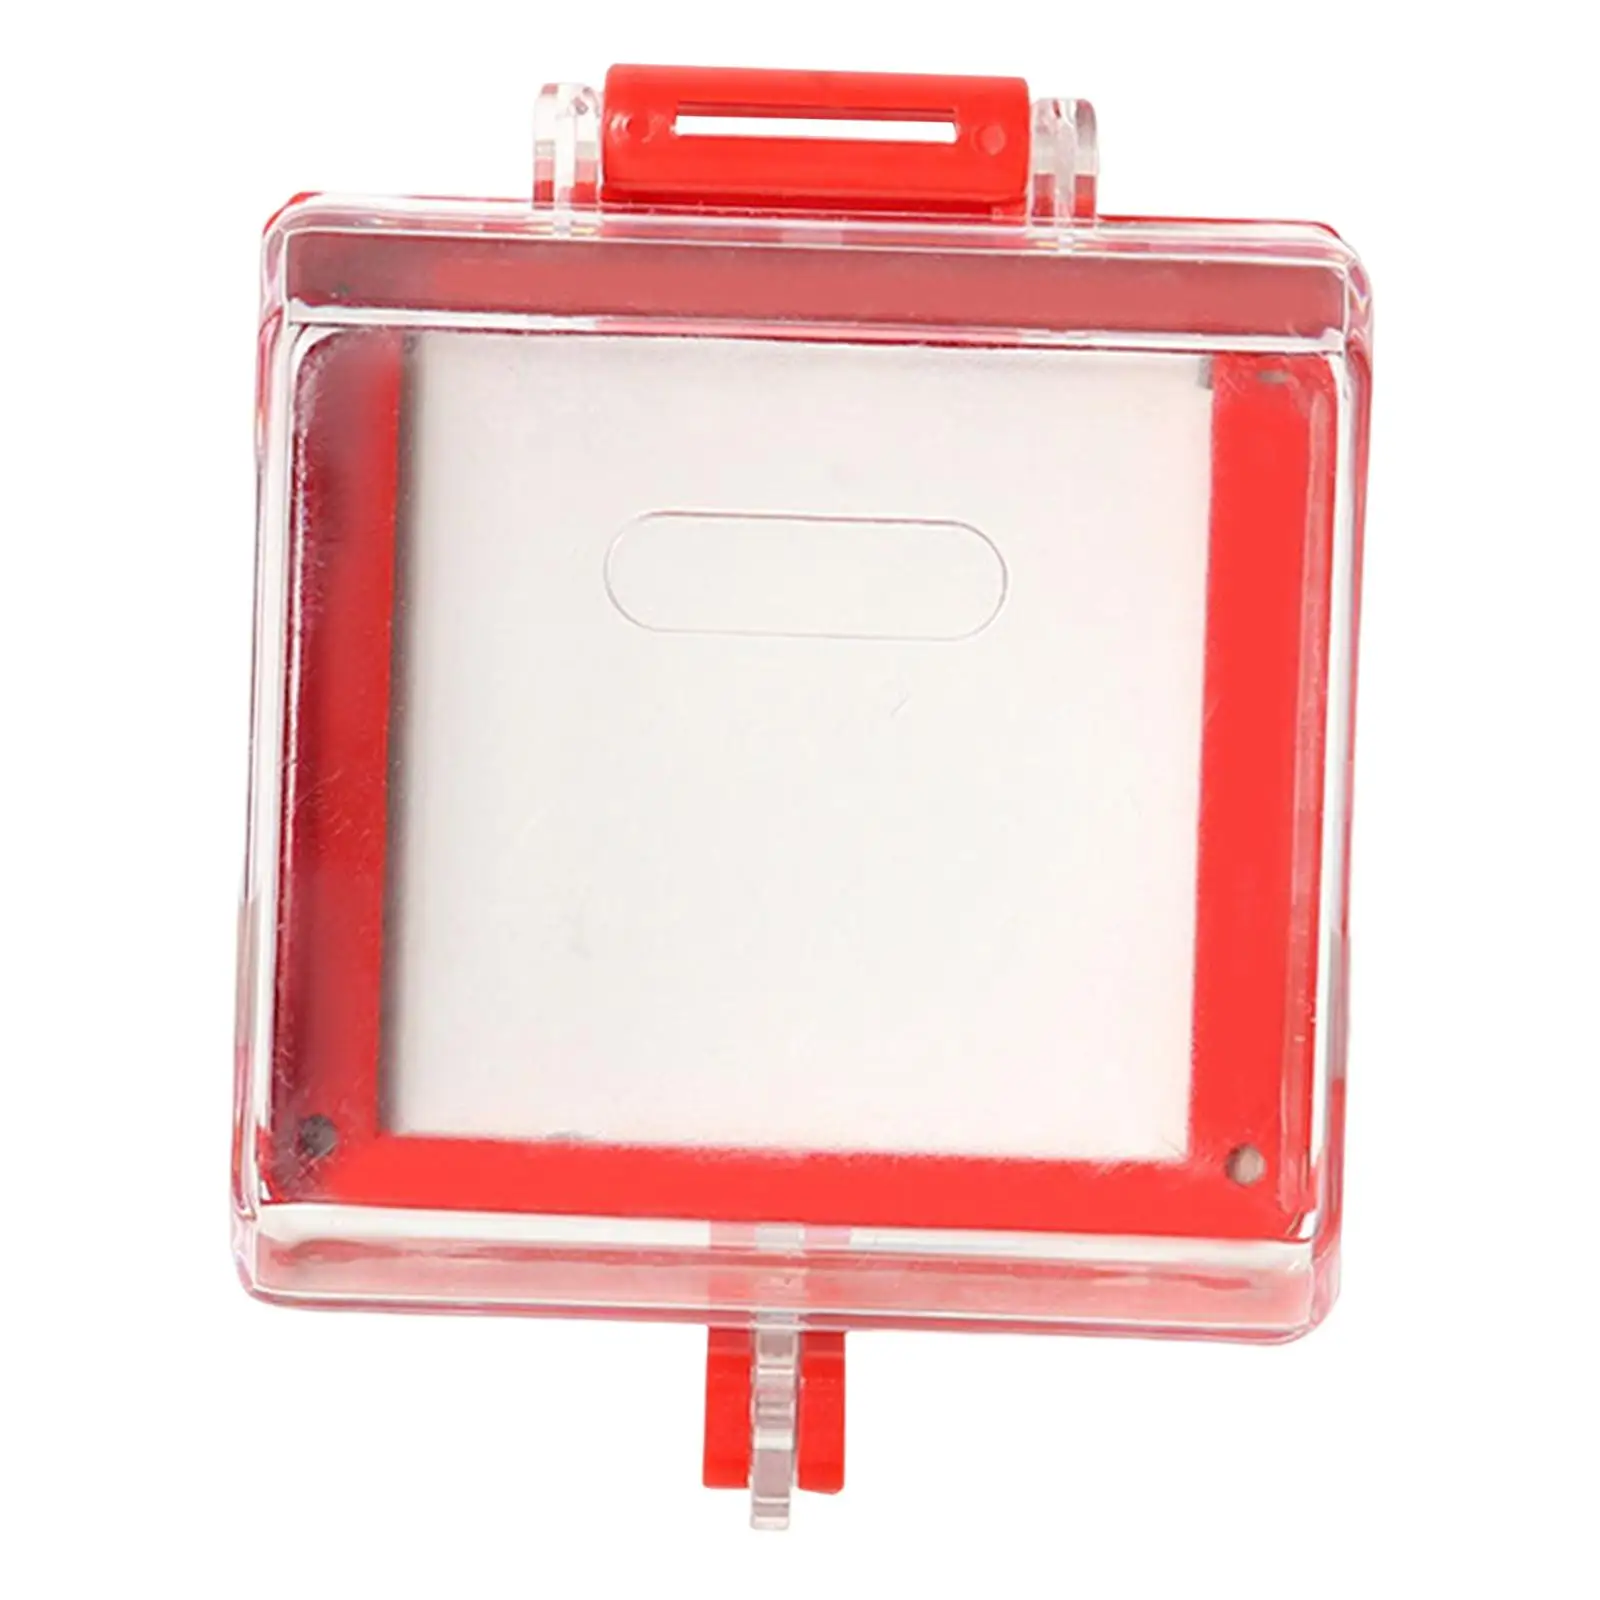 Waterproof Cover Outlet Protective Cover Wall Switch Socket Switch Cover for Living Room Home Door Bell Switch Panel